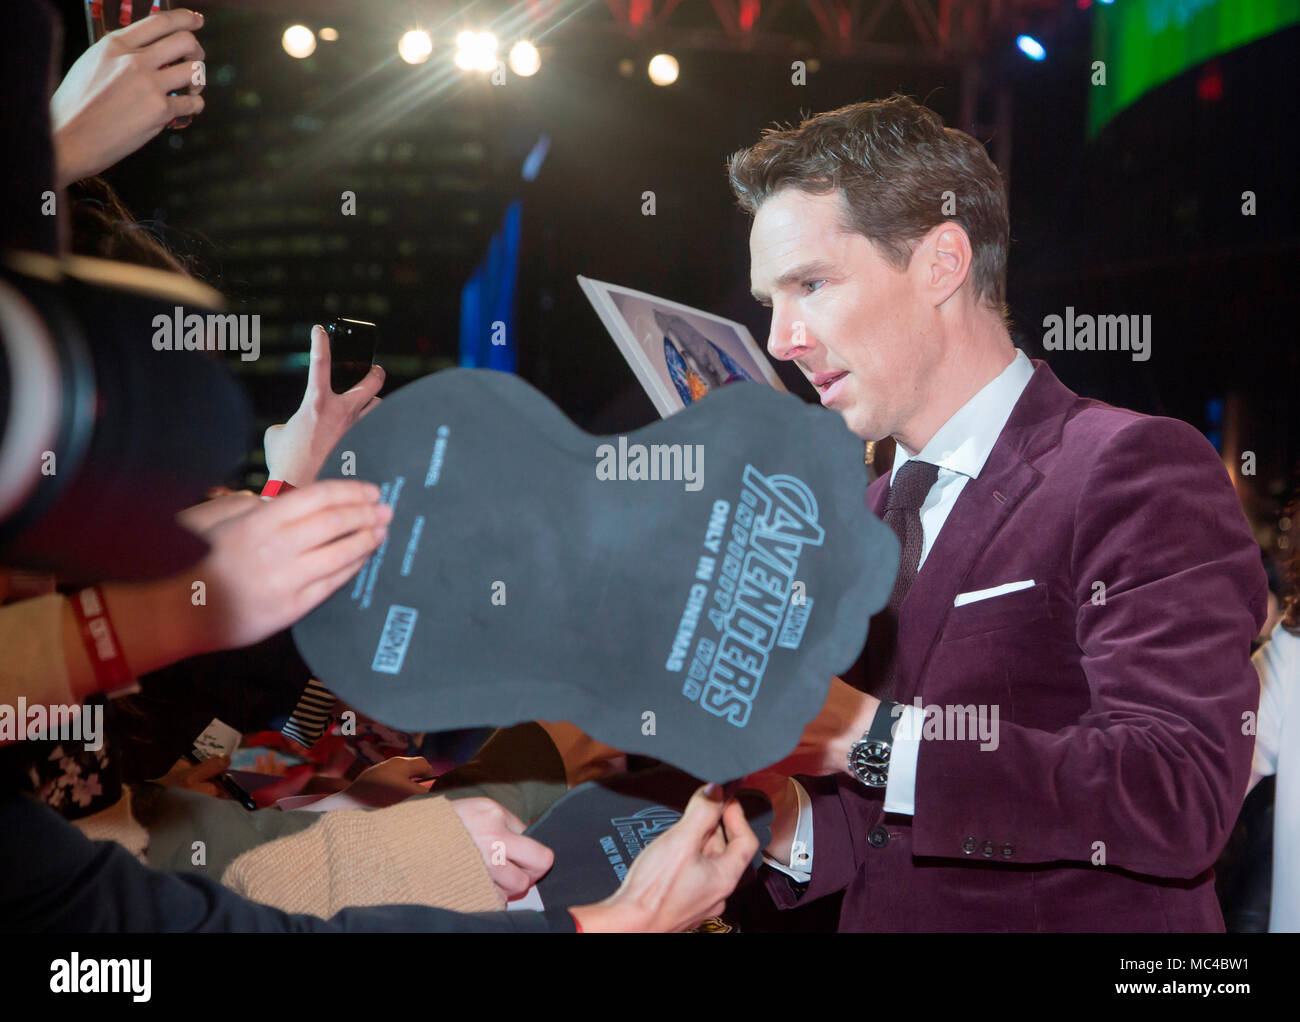 Benedict Cumberbatch, Apr 12, 2018 : A cast member of the new movie 'Avengers: Infinity War', Benedict Cumberbatch attends a red carpet event for the movie in Seoul, South Korea. The third movie in the 'Avengers' series will be open in South Korea on April 25. Credit: Lee Jae-Won/AFLO/Alamy Live News Stock Photo